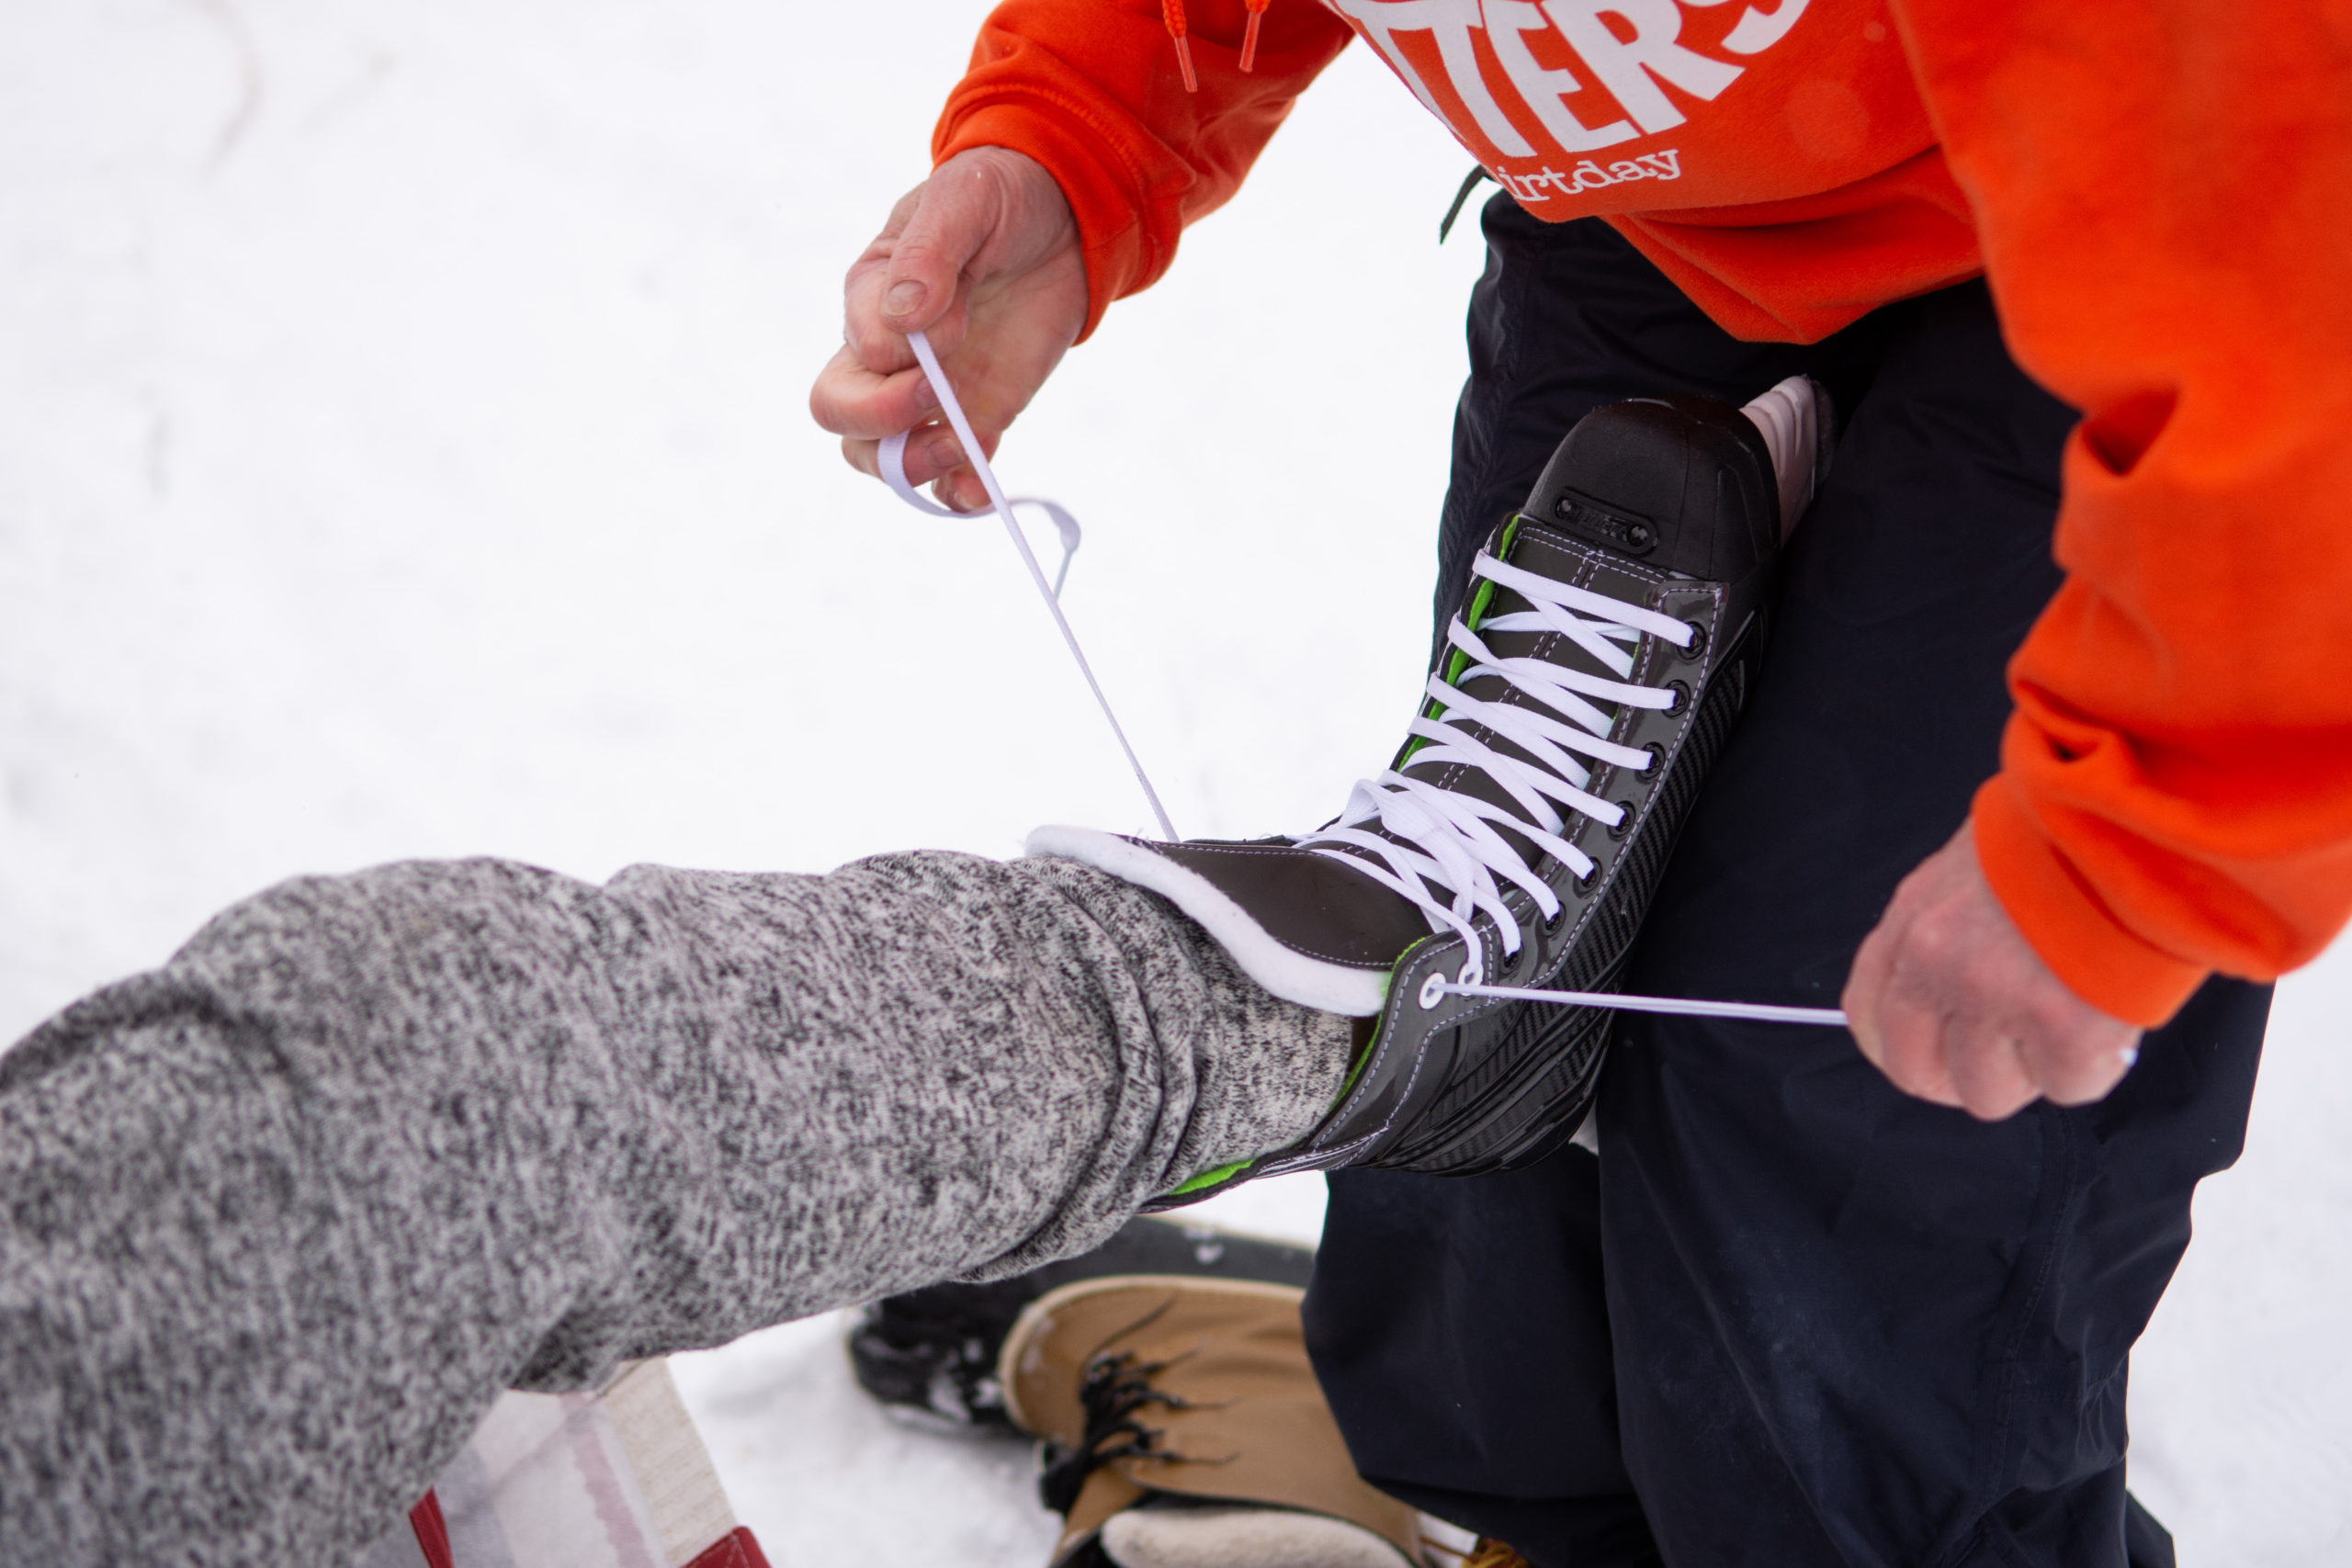 A student's skates are laced up by a staff member.